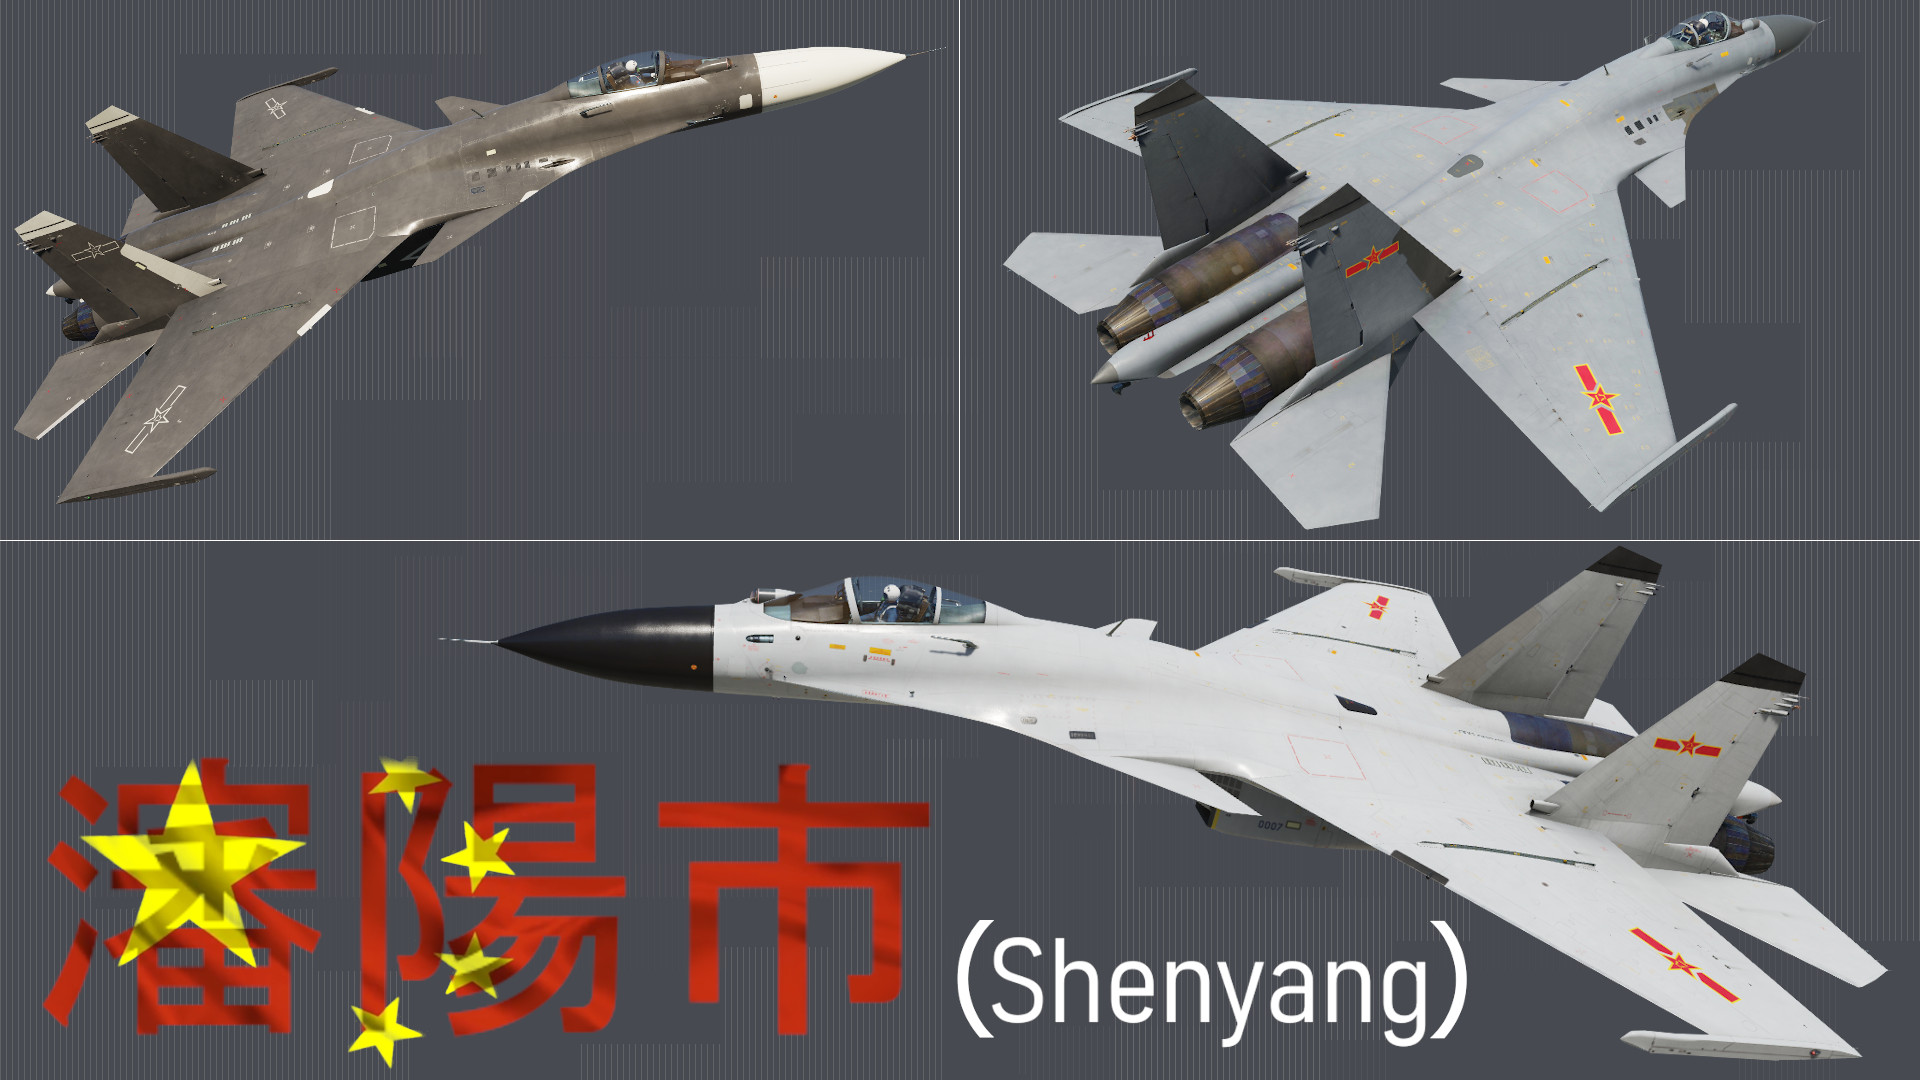 J-15 Shenyang - Flanker-X2 - Chinese Air Force